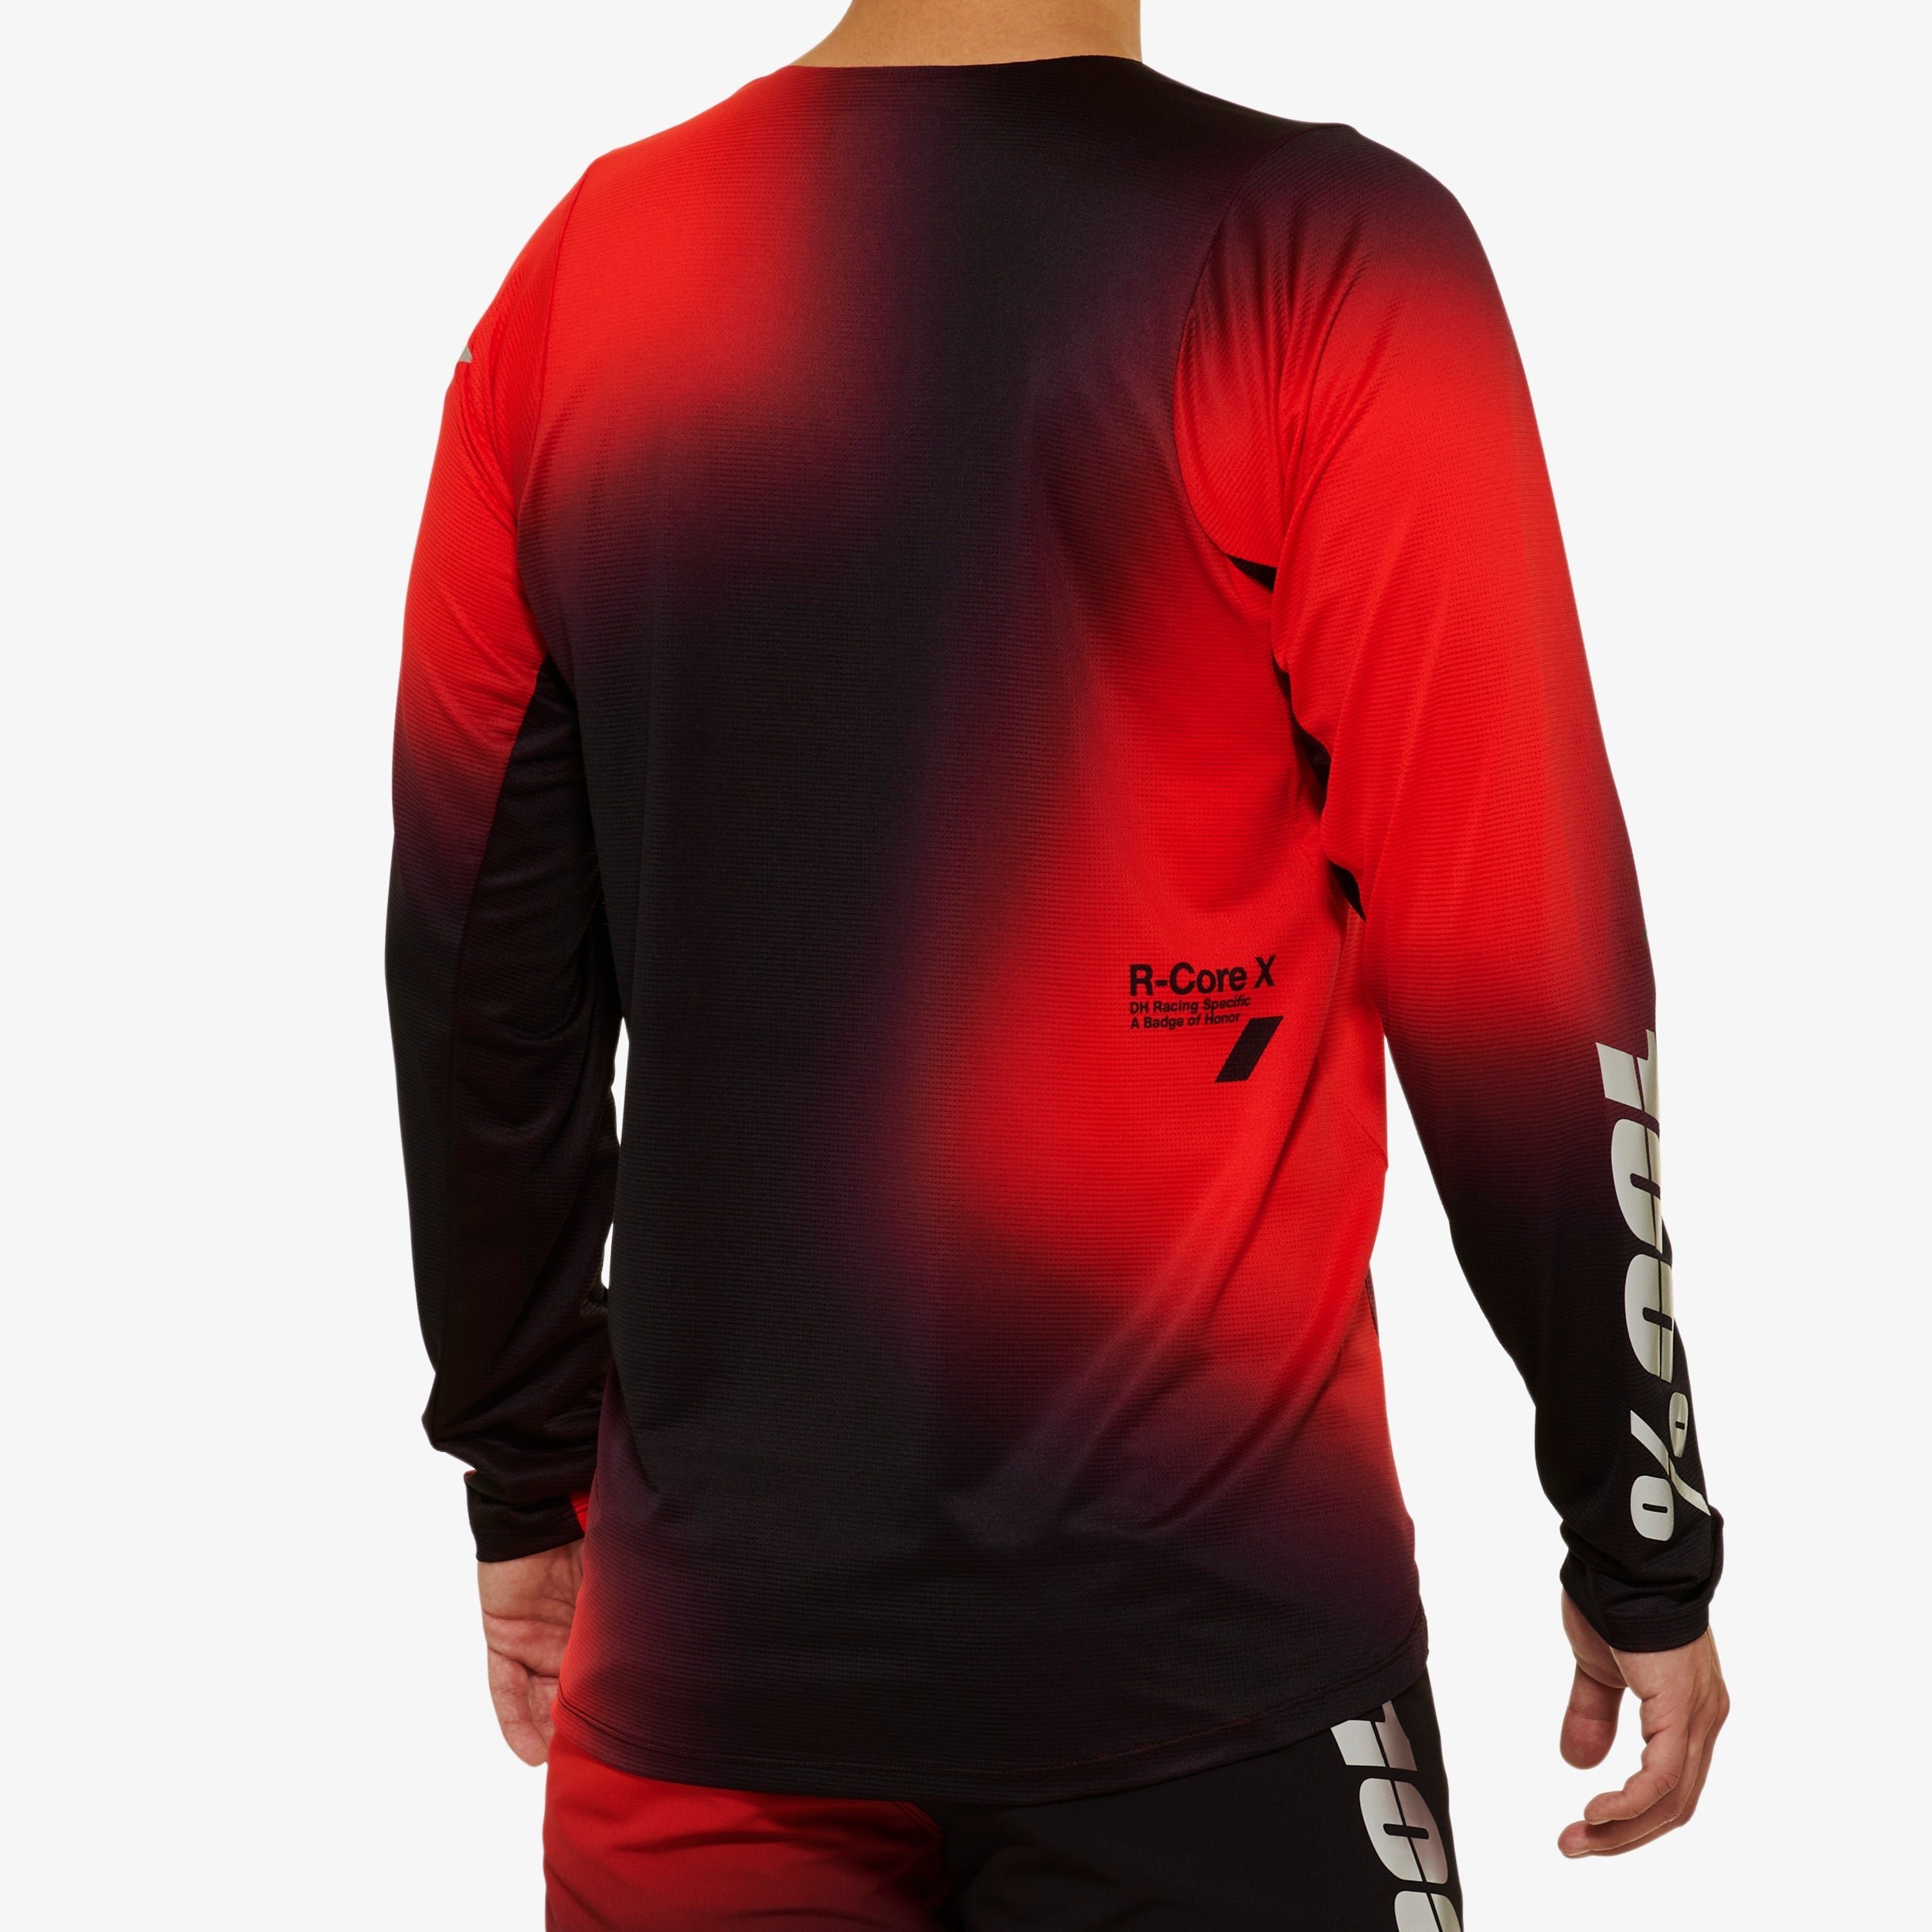 R-CORE-X LE Long Sleeve Jersey Black/Red - Secondary